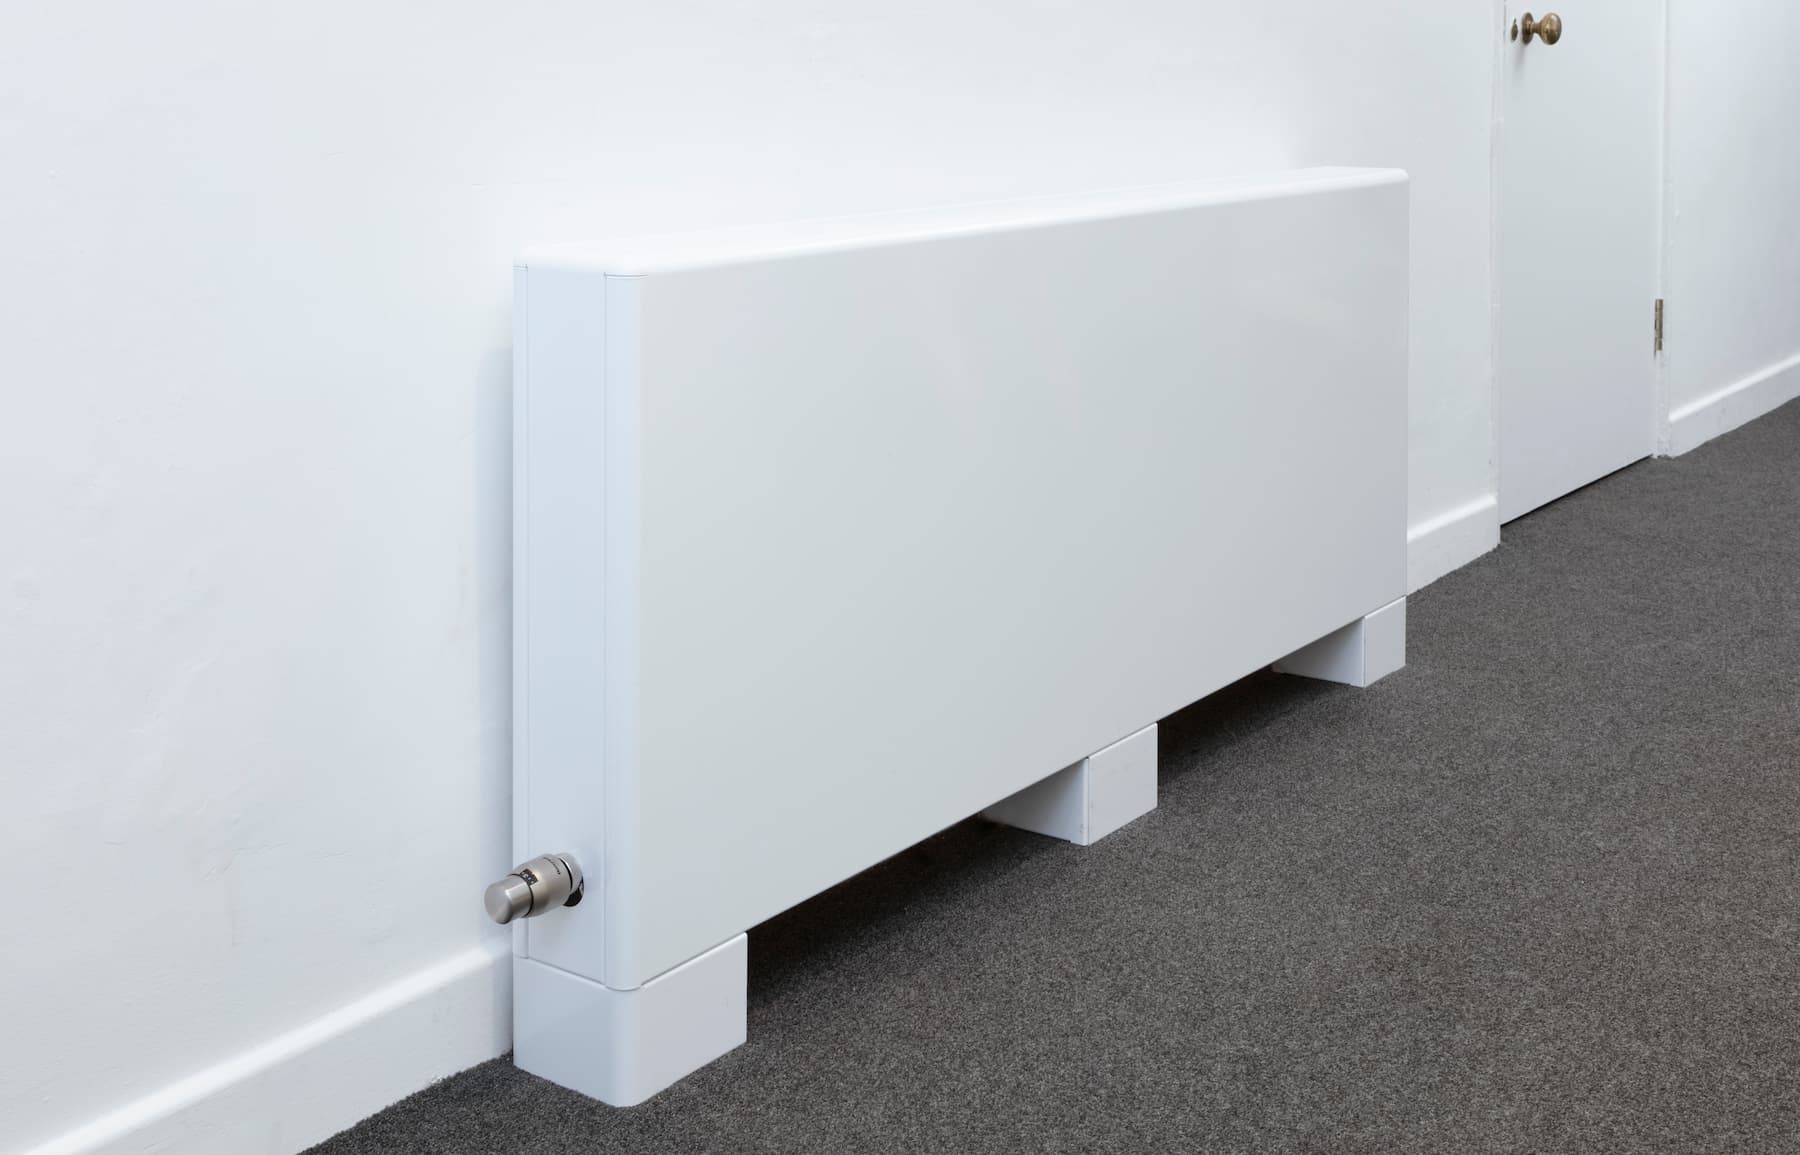 Free standing radiator for air source heat pumps